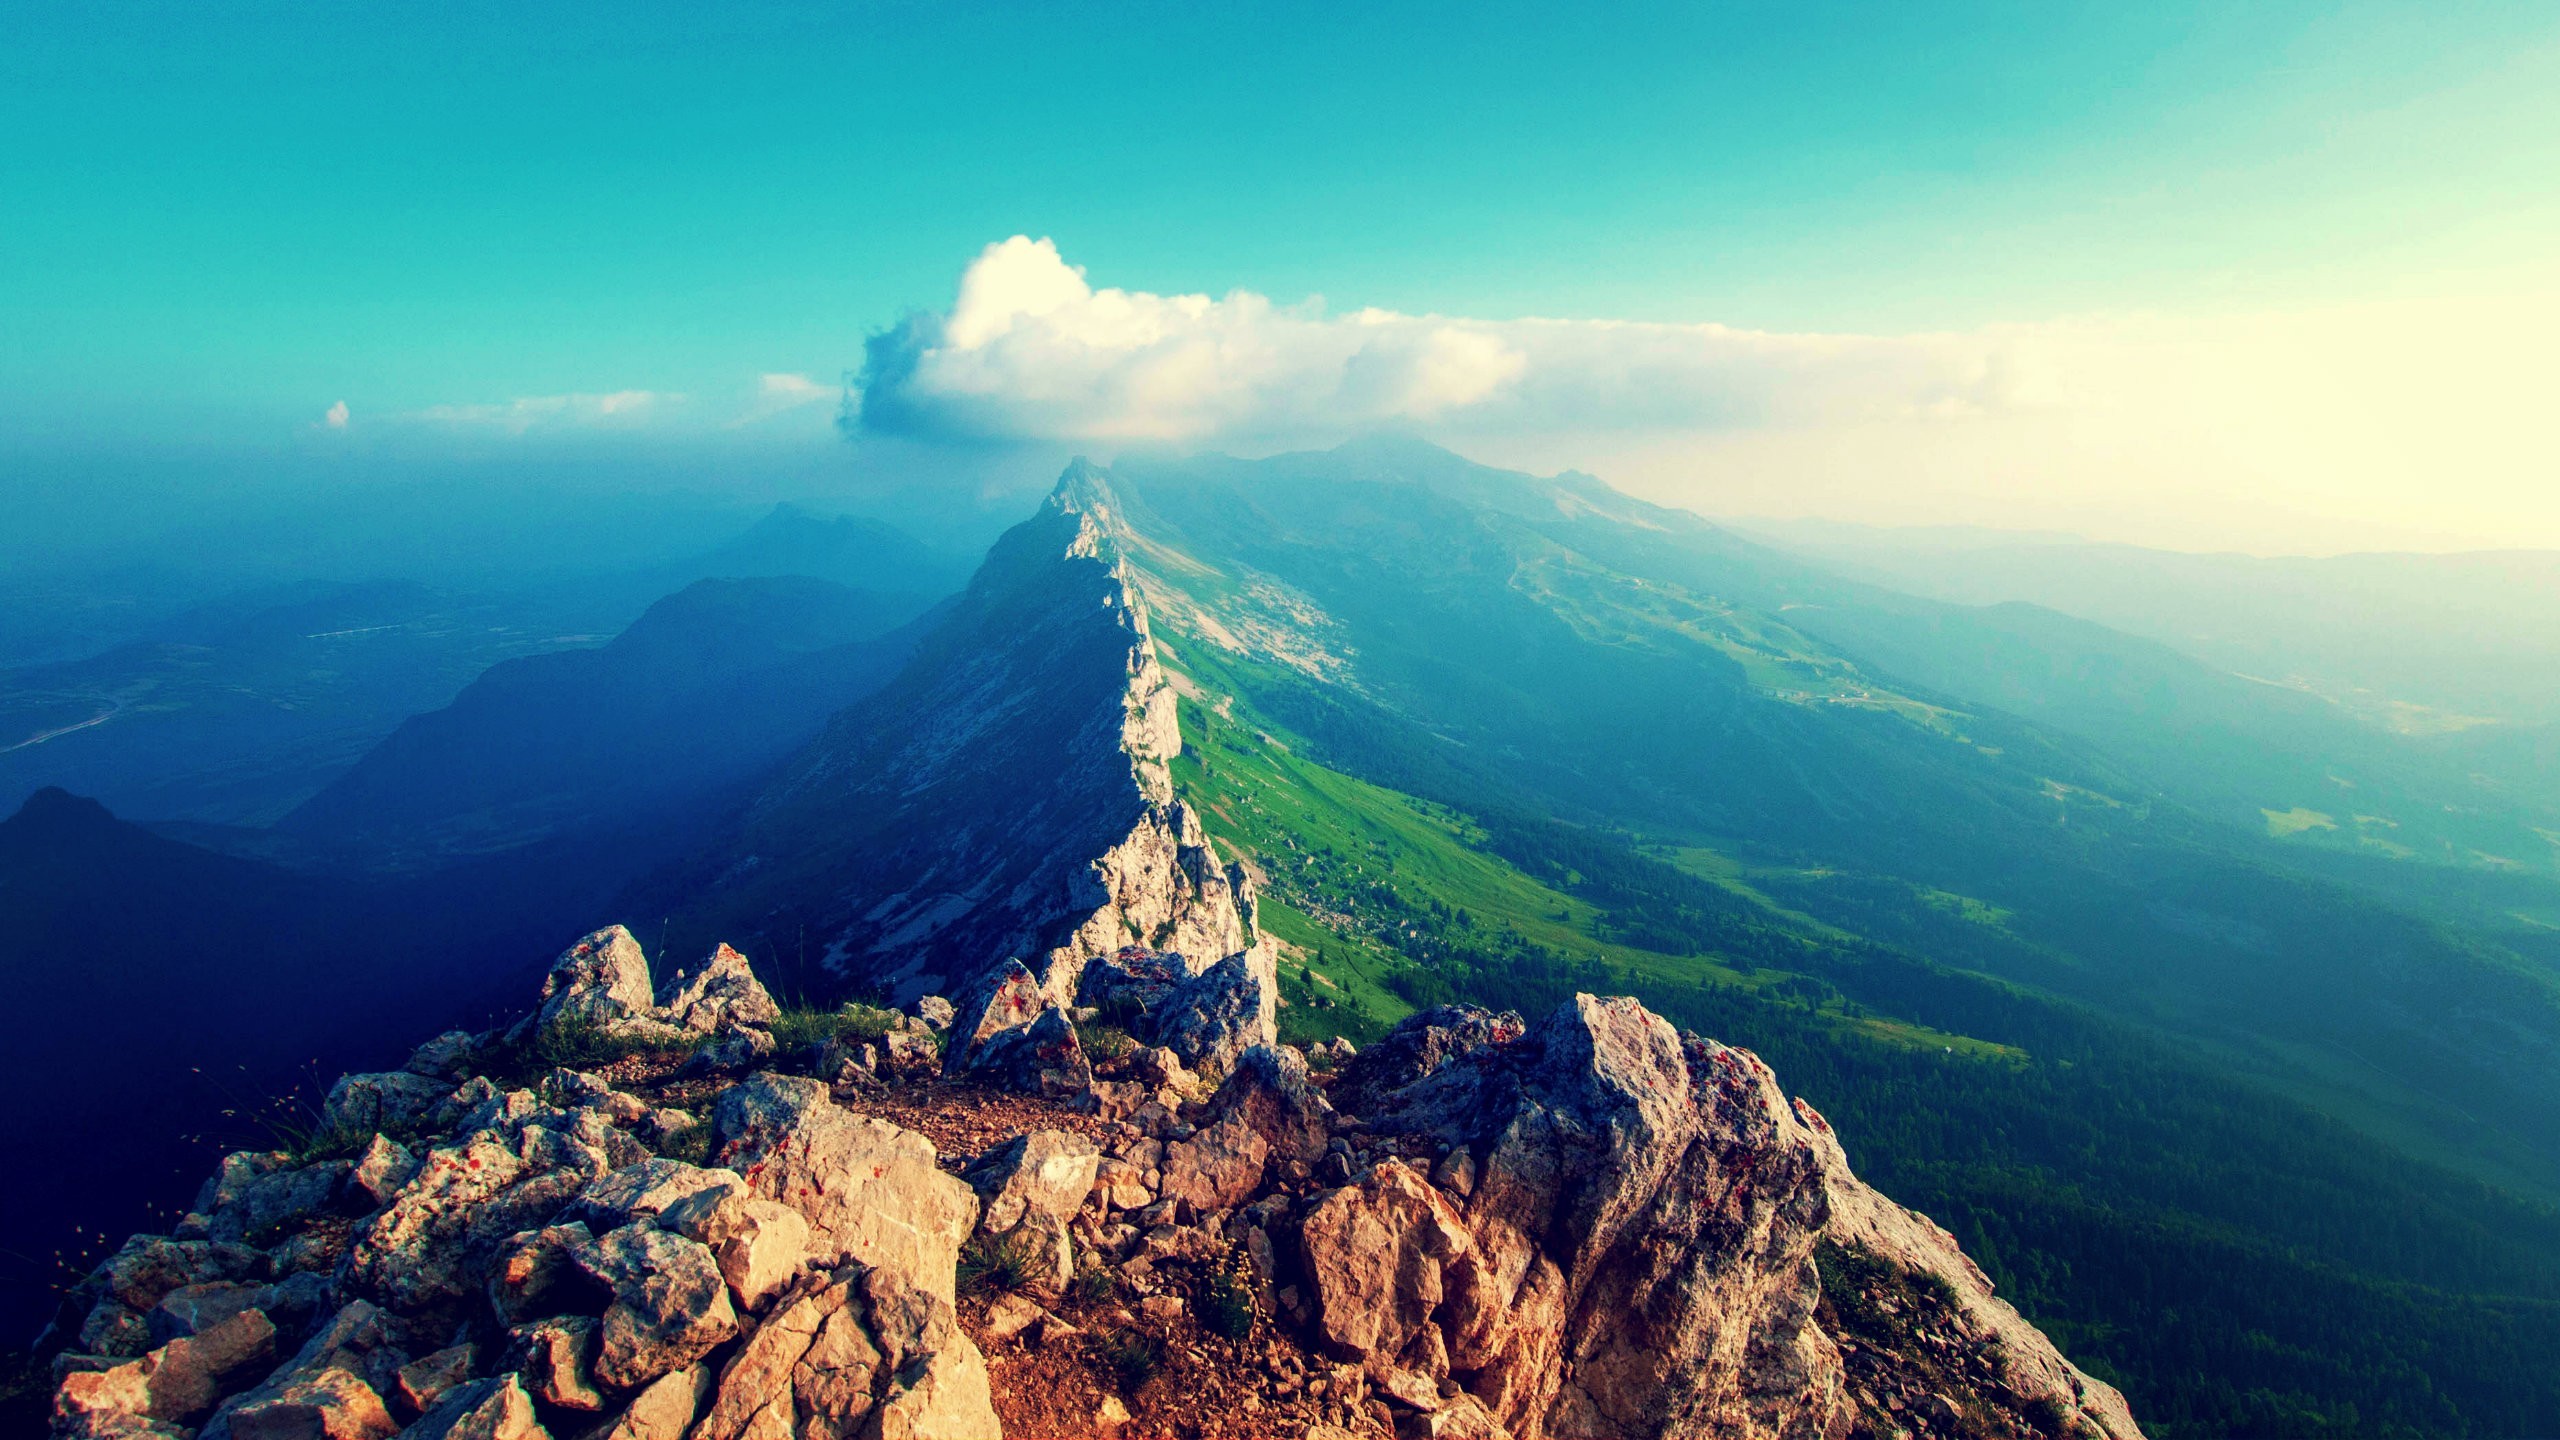 General 2560x1440 mountains landscape nature clouds sky forest panorama